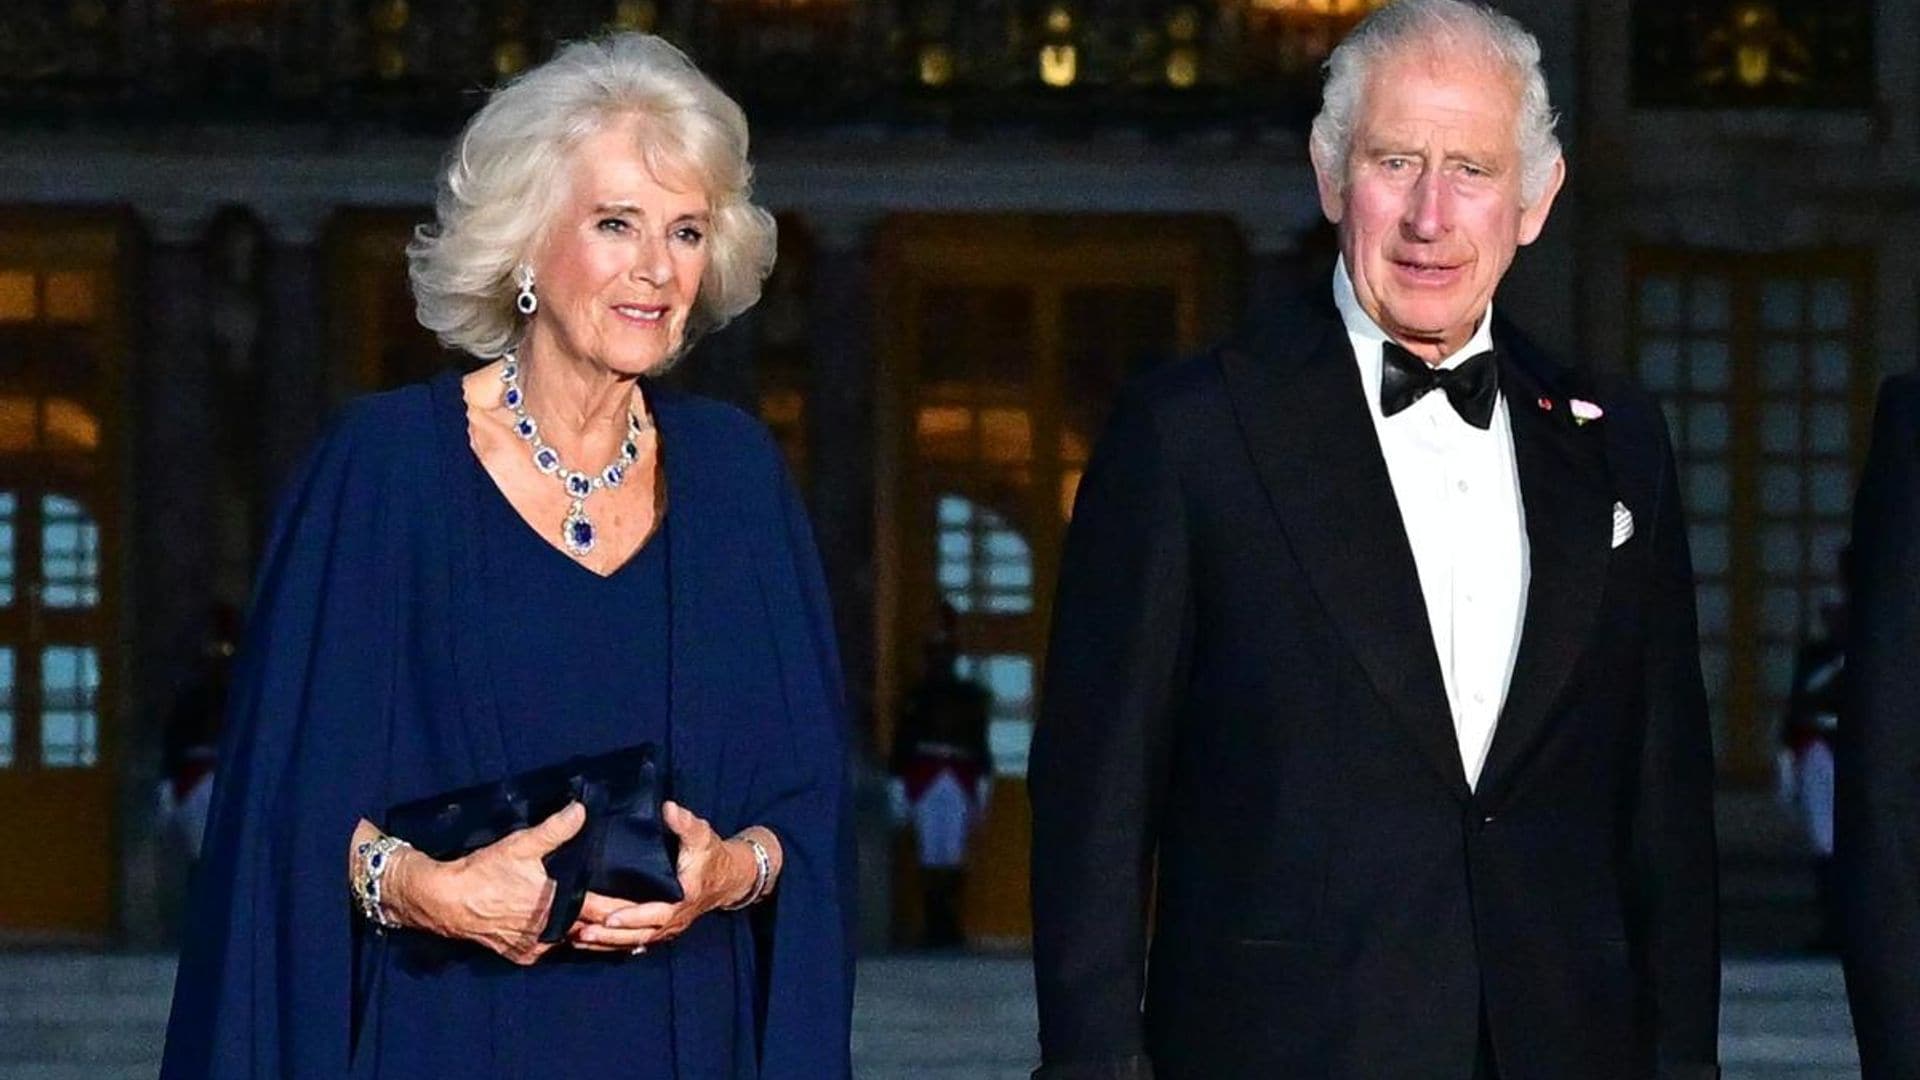 Charlotte Casiraghi’s mother-in-law attends banquet for King Charles and Queen Camilla